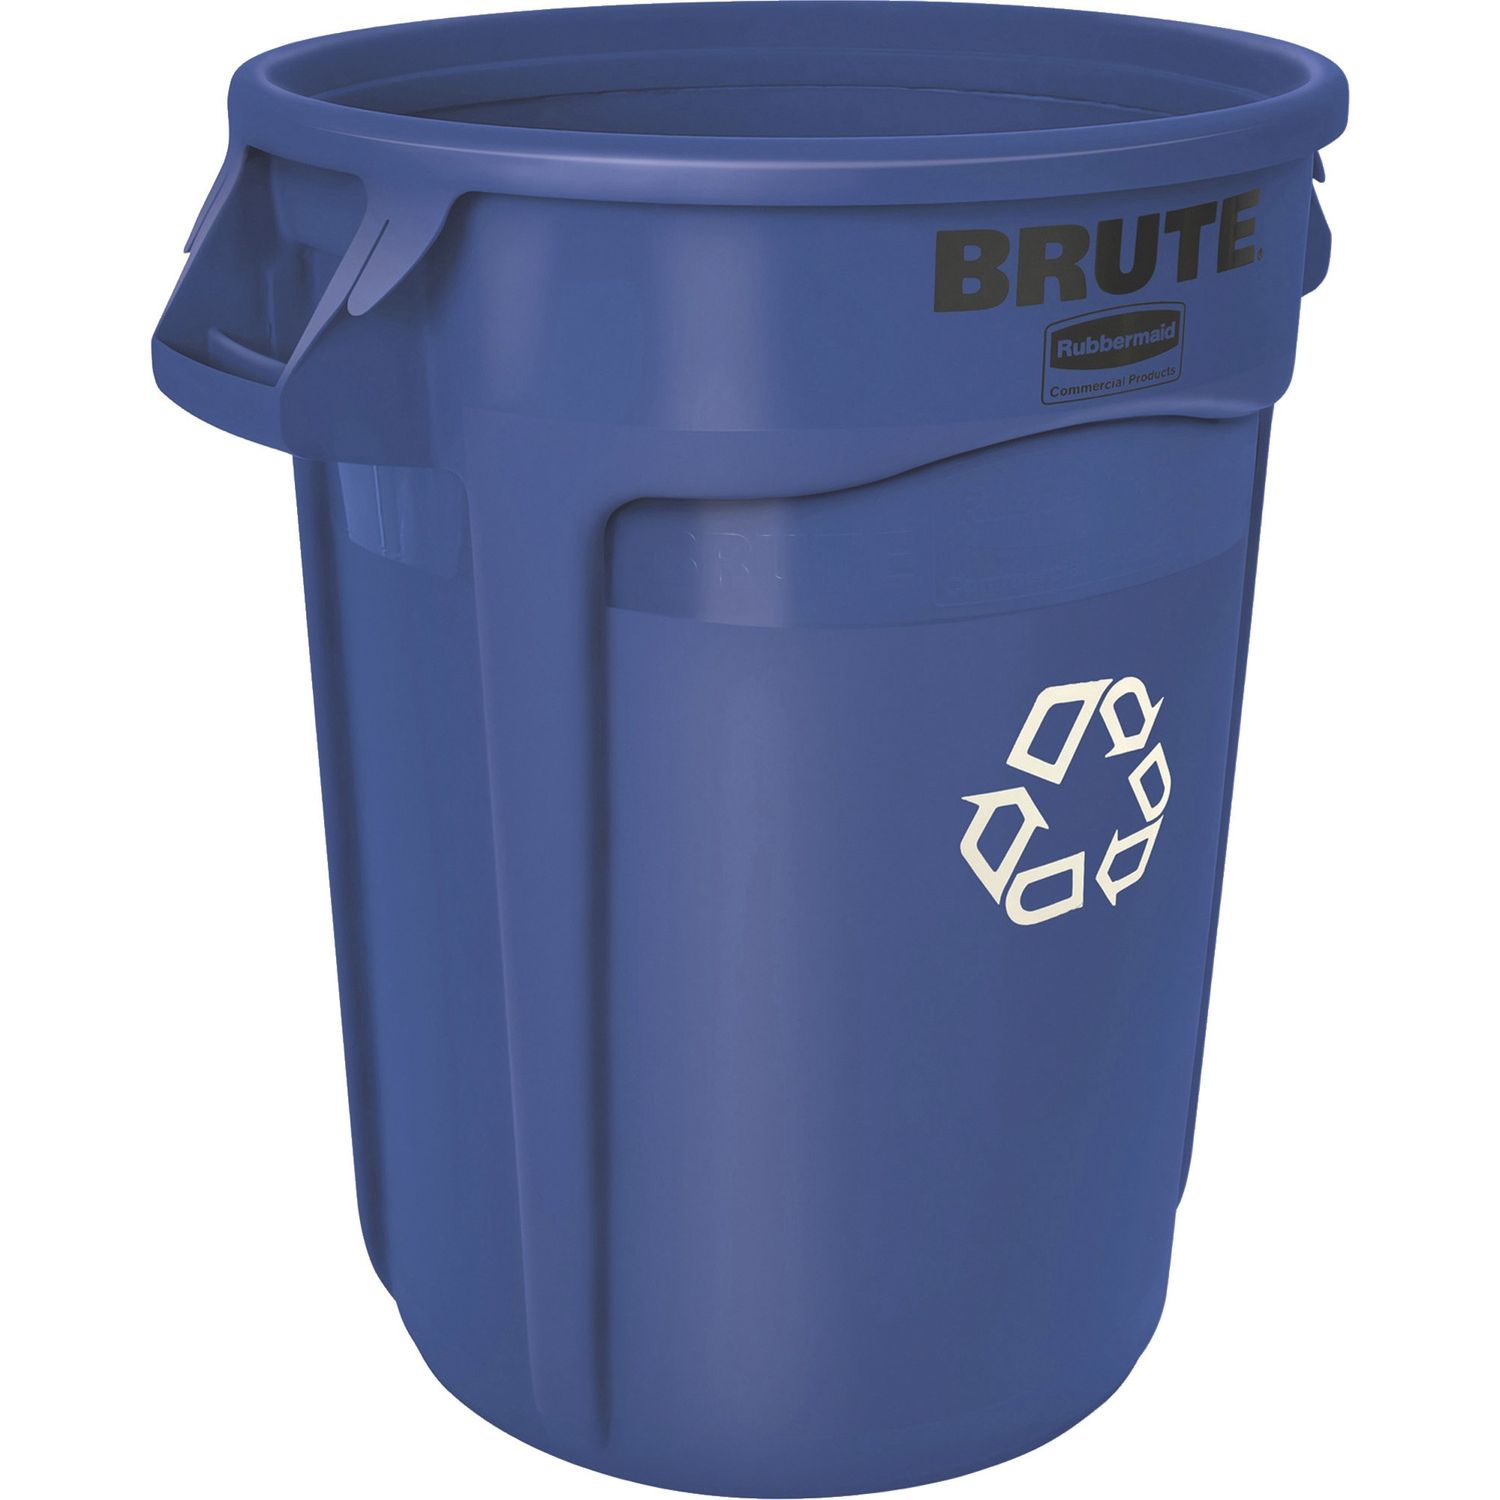 Brute Round Container 32 gal Capacity, Round, Heavy Duty, Handle, Tear Resistant, Damage Resistant, Durable, UV Coated, Fade Resistant, Warp Resistant, Crack Resistant, Crush Resistant, Blue, 1 Each